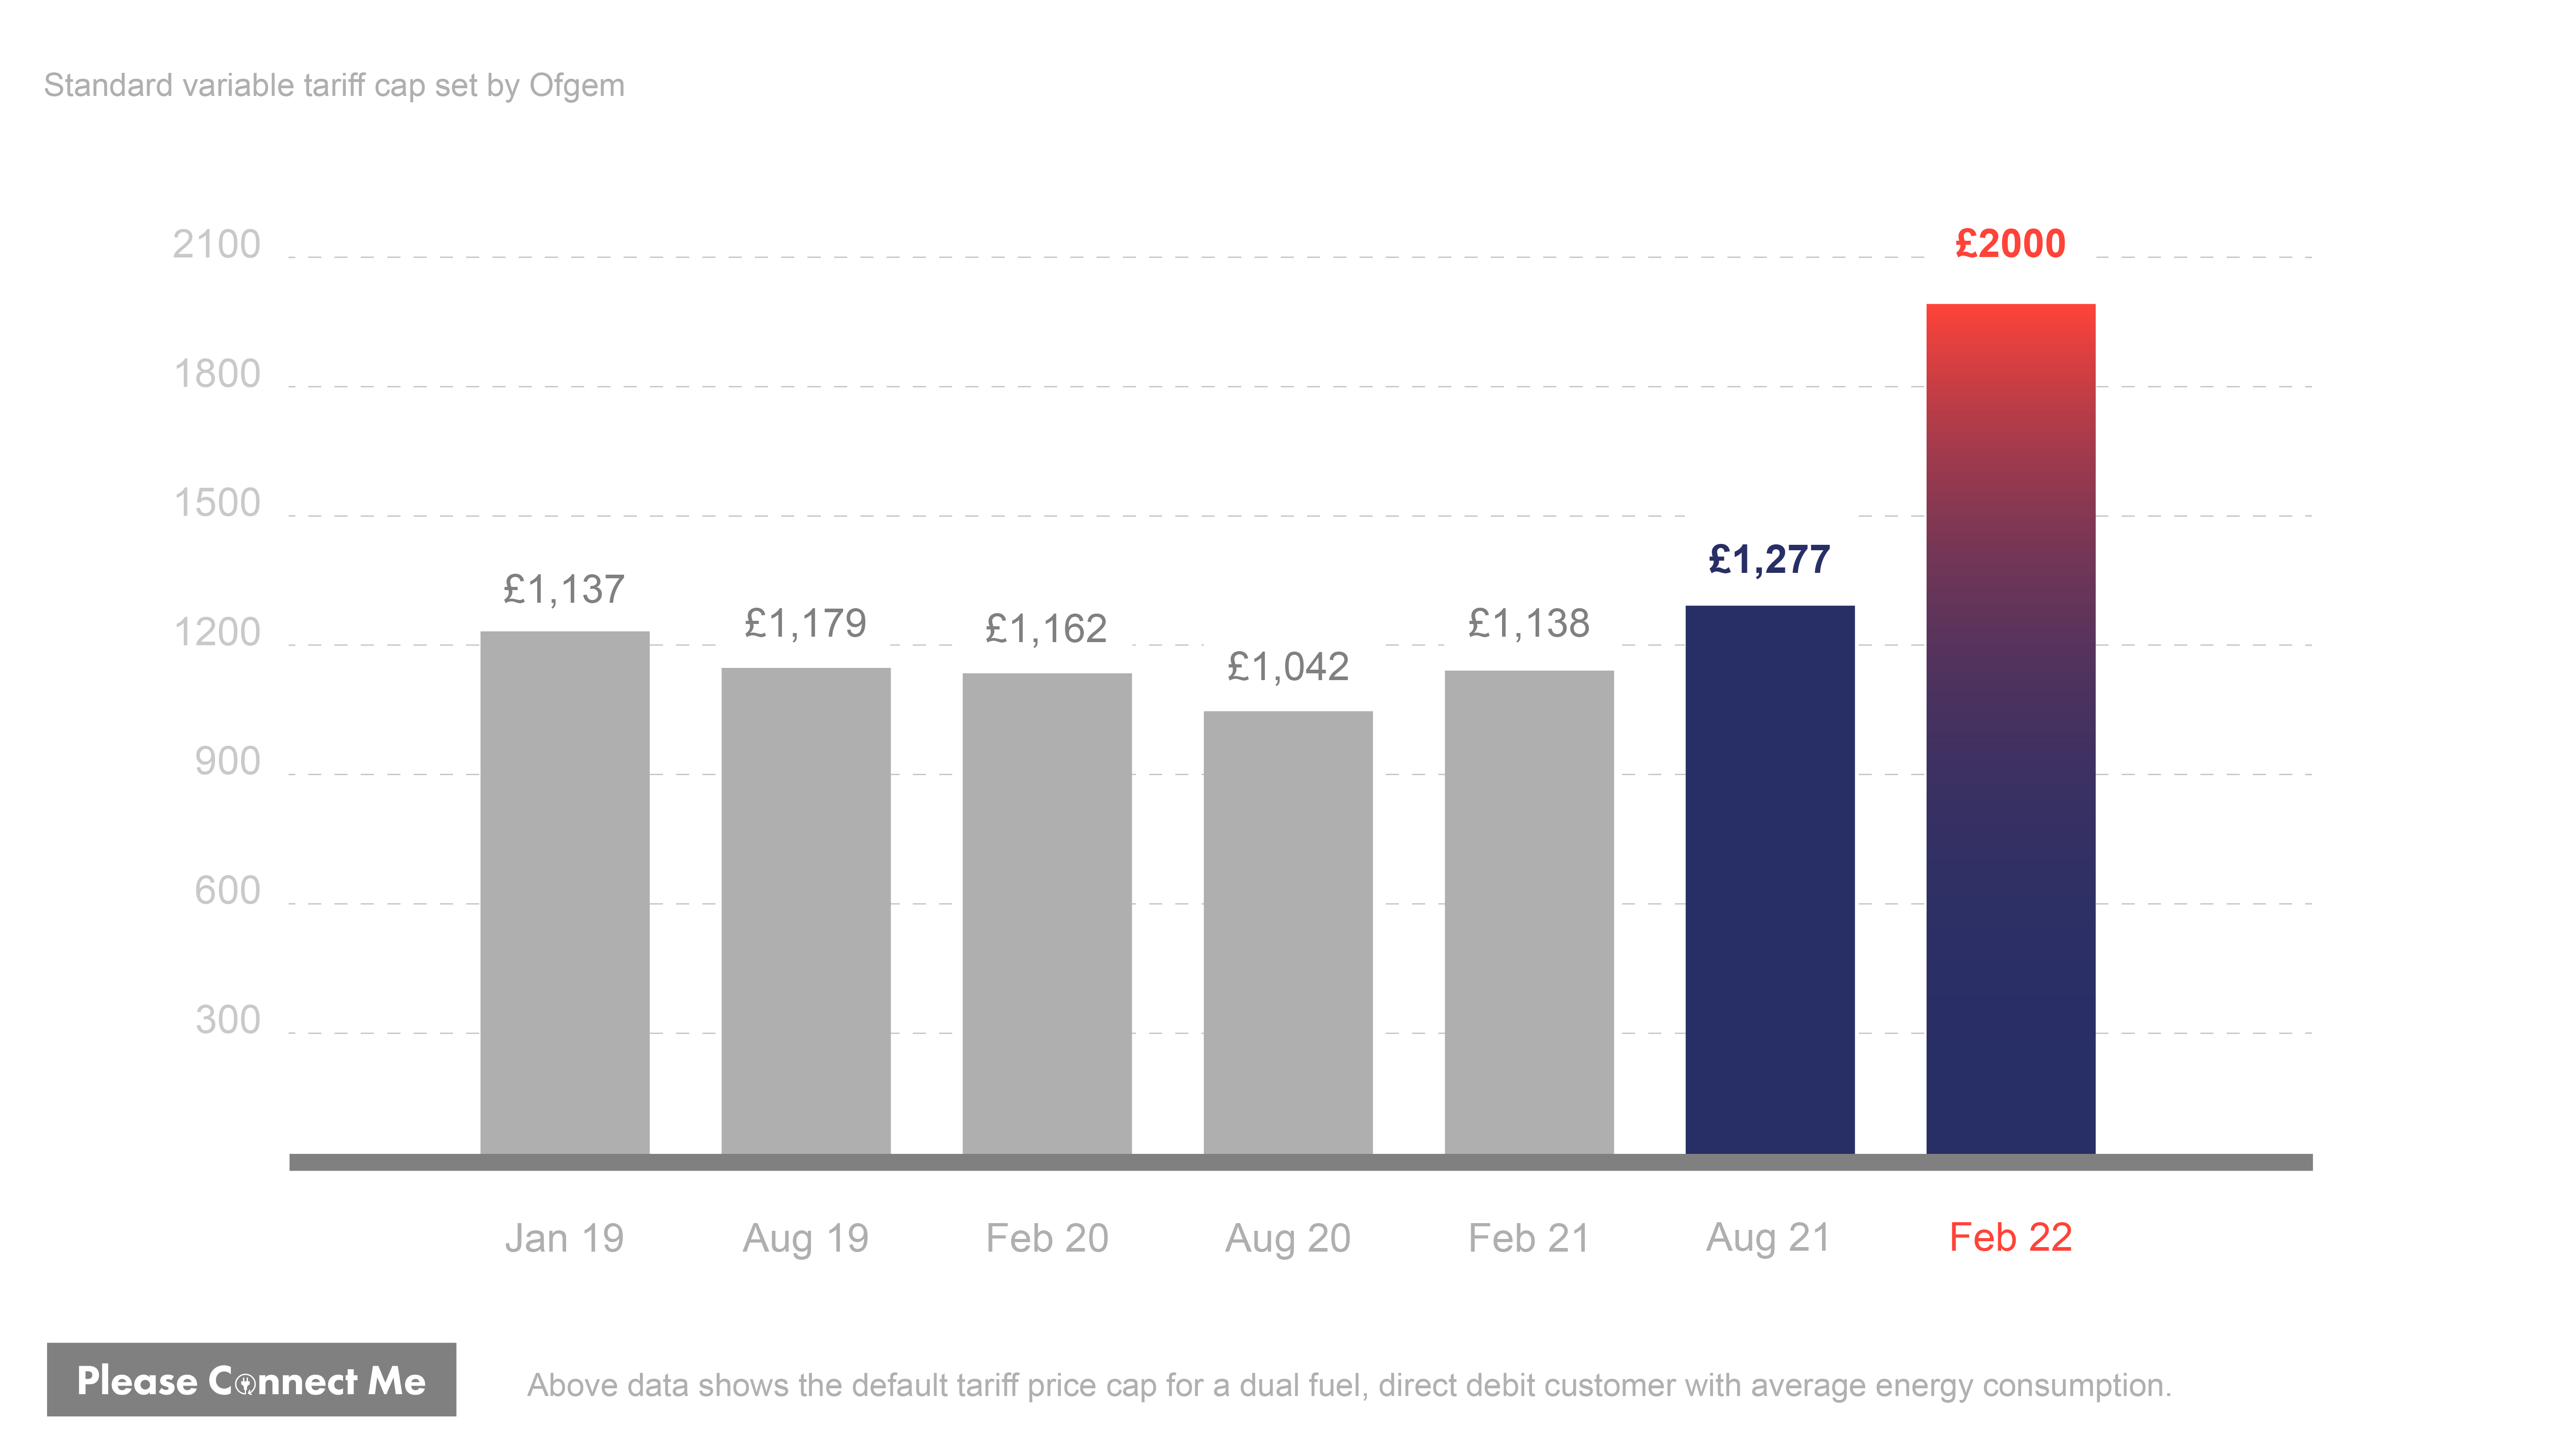 Bar graph showing the Ofgem energy price cap since January 2019